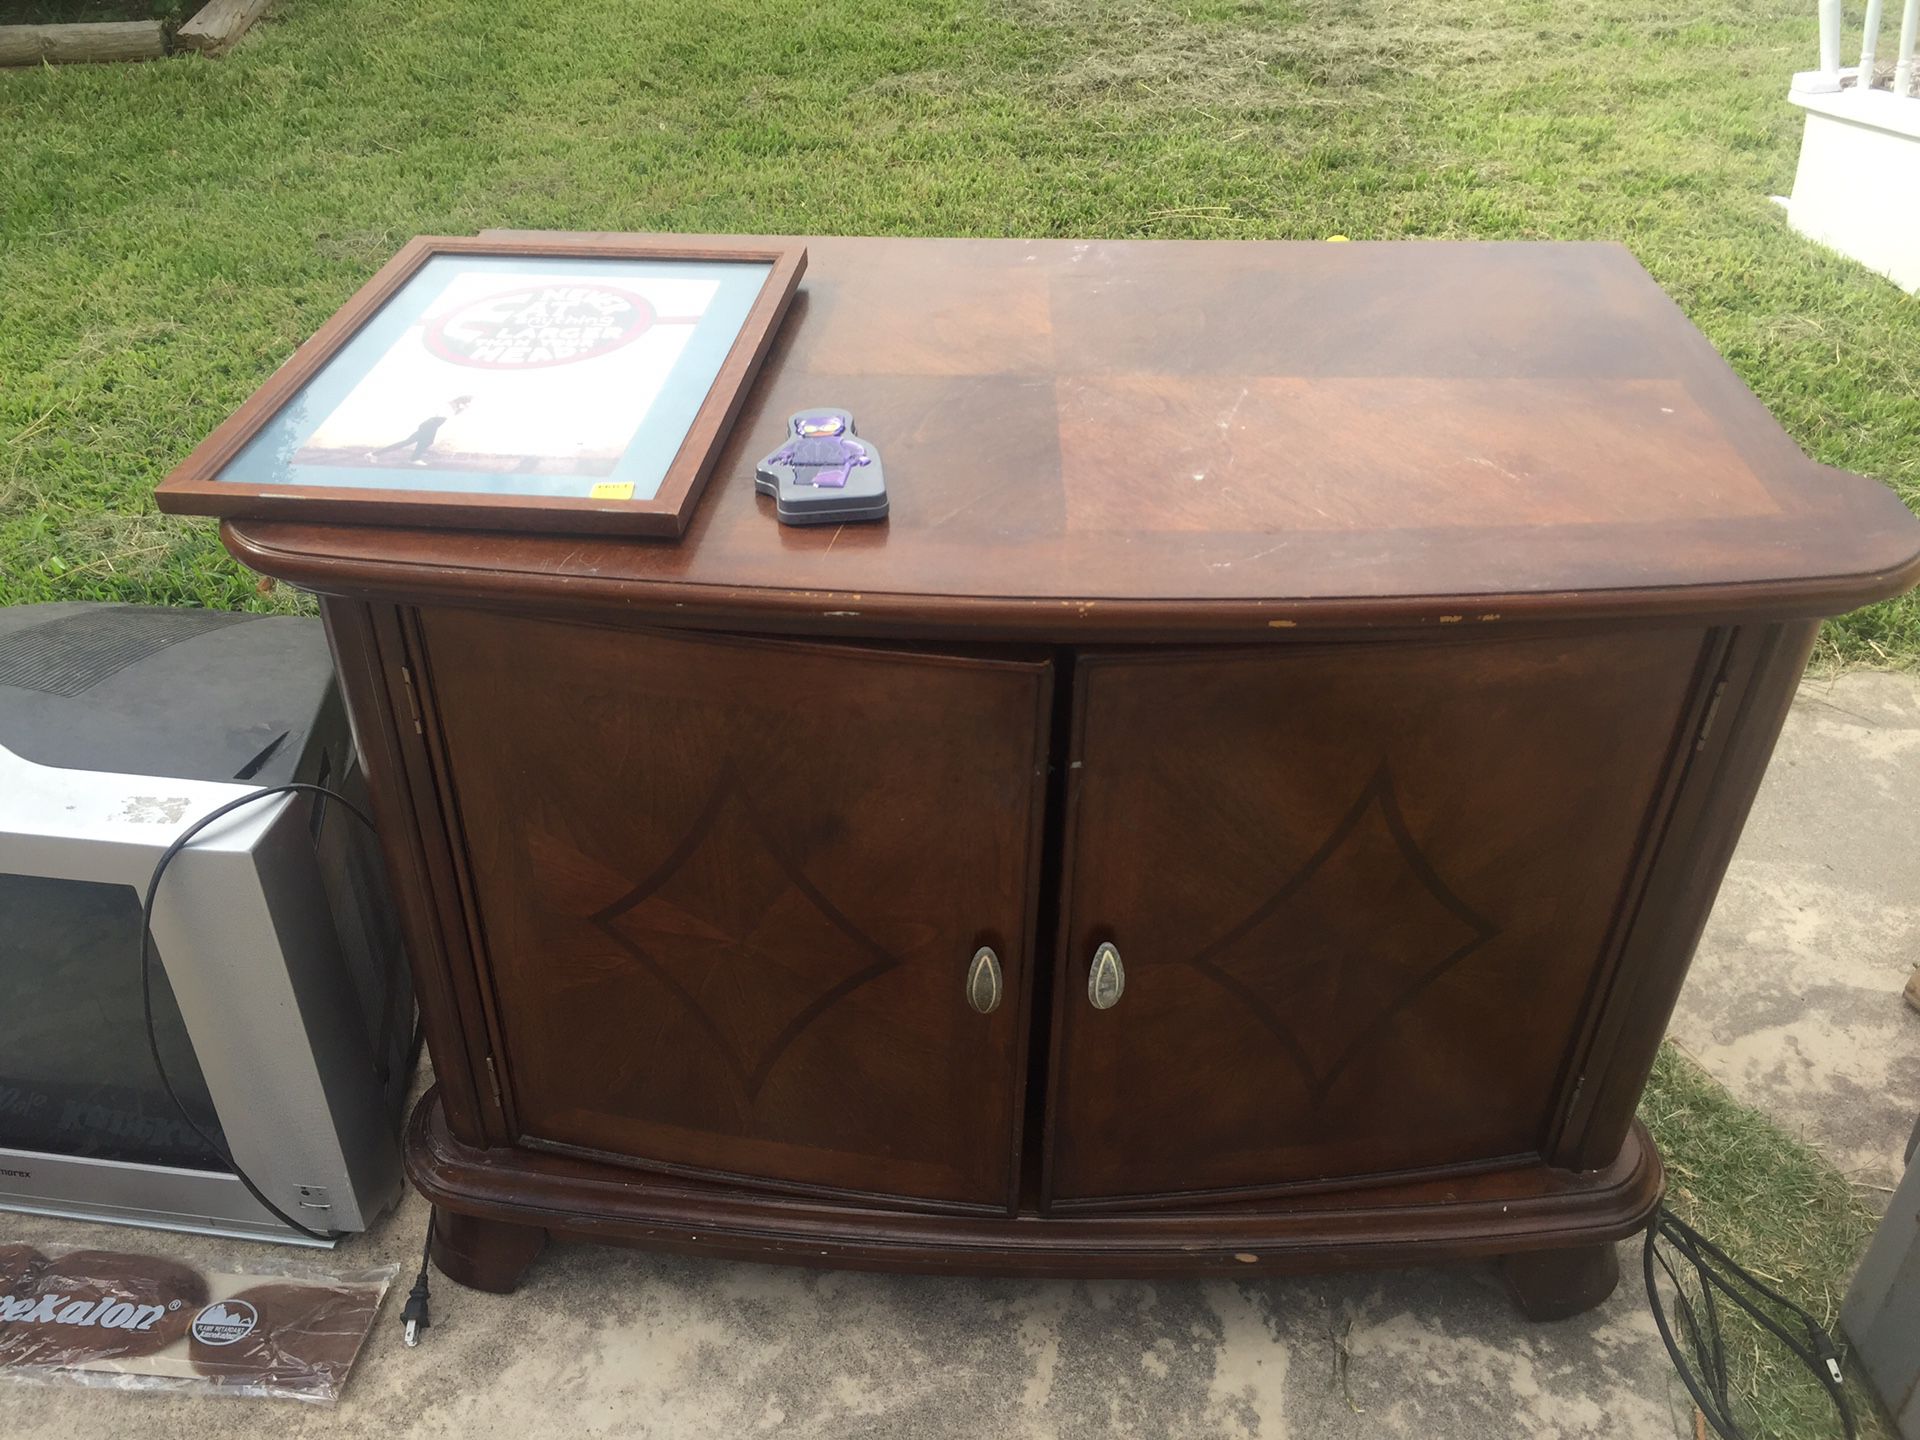 Solid wood tv stand $60 with free tv doddridge area cc Tx 42" long, 28" tall, 22" wide inside two drawers and 2 shelves